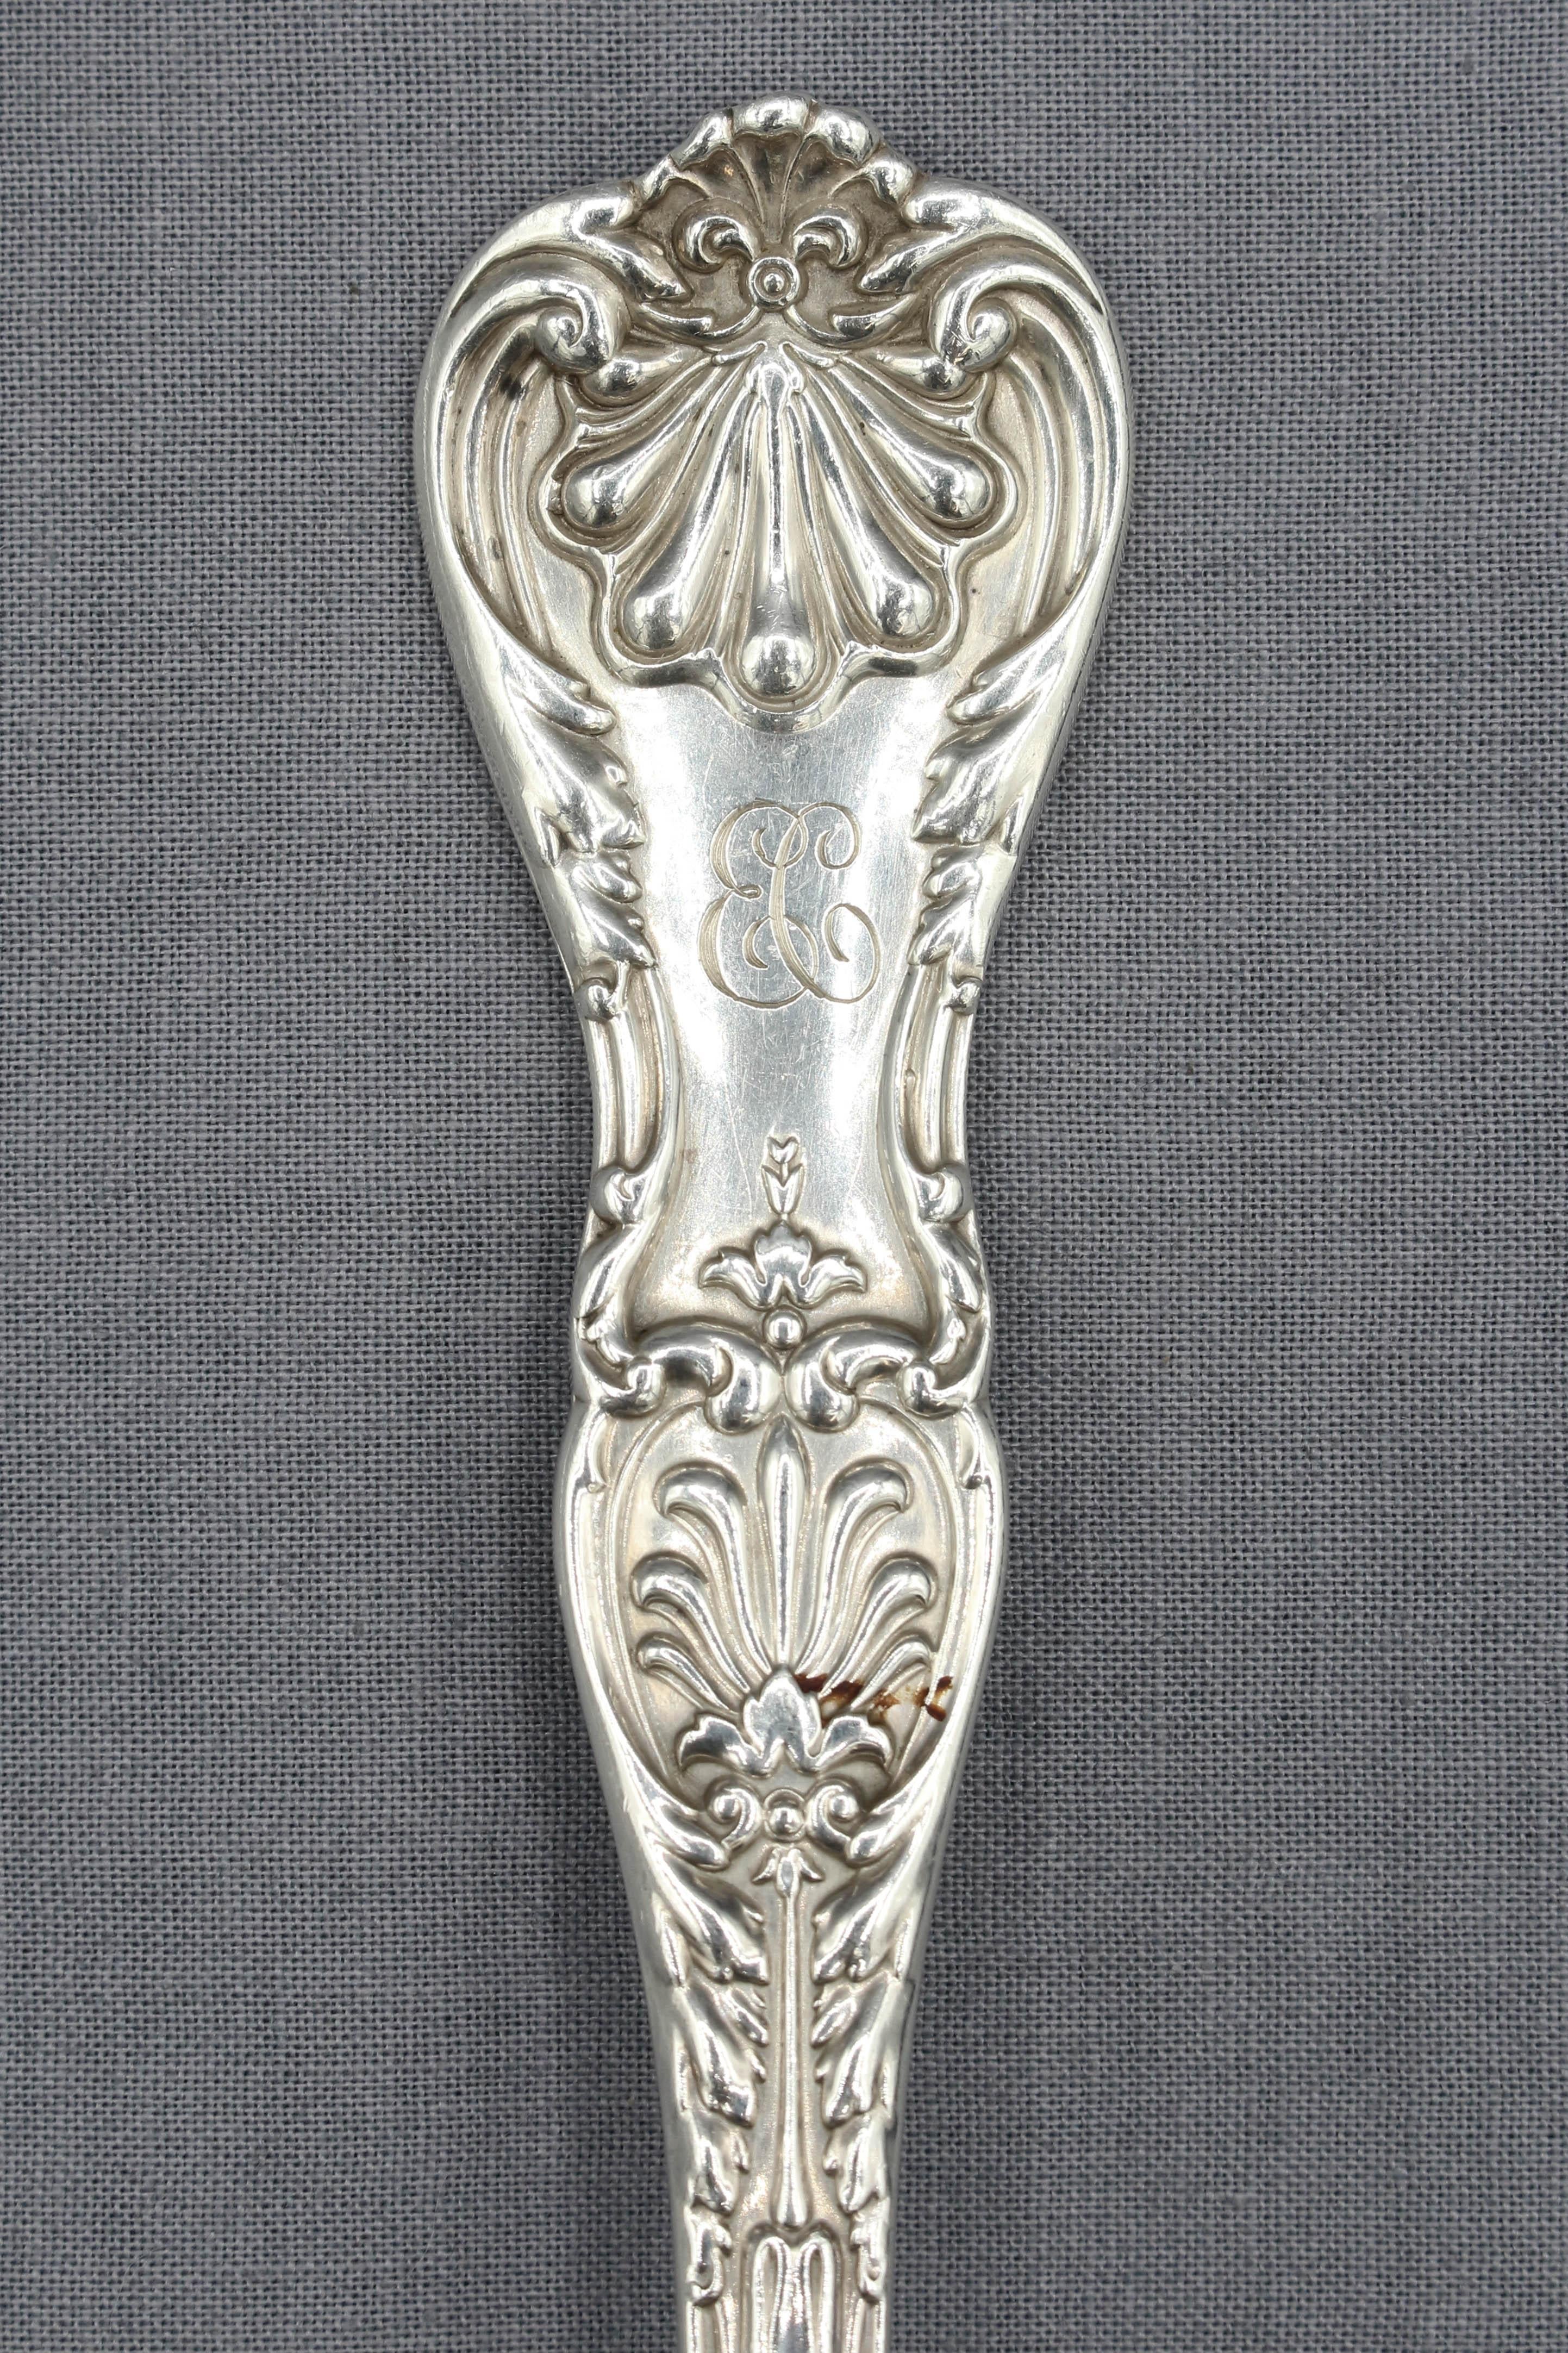 Early 20th Century Sterling Silver Gorham Berry Spoon In Good Condition For Sale In Chapel Hill, NC